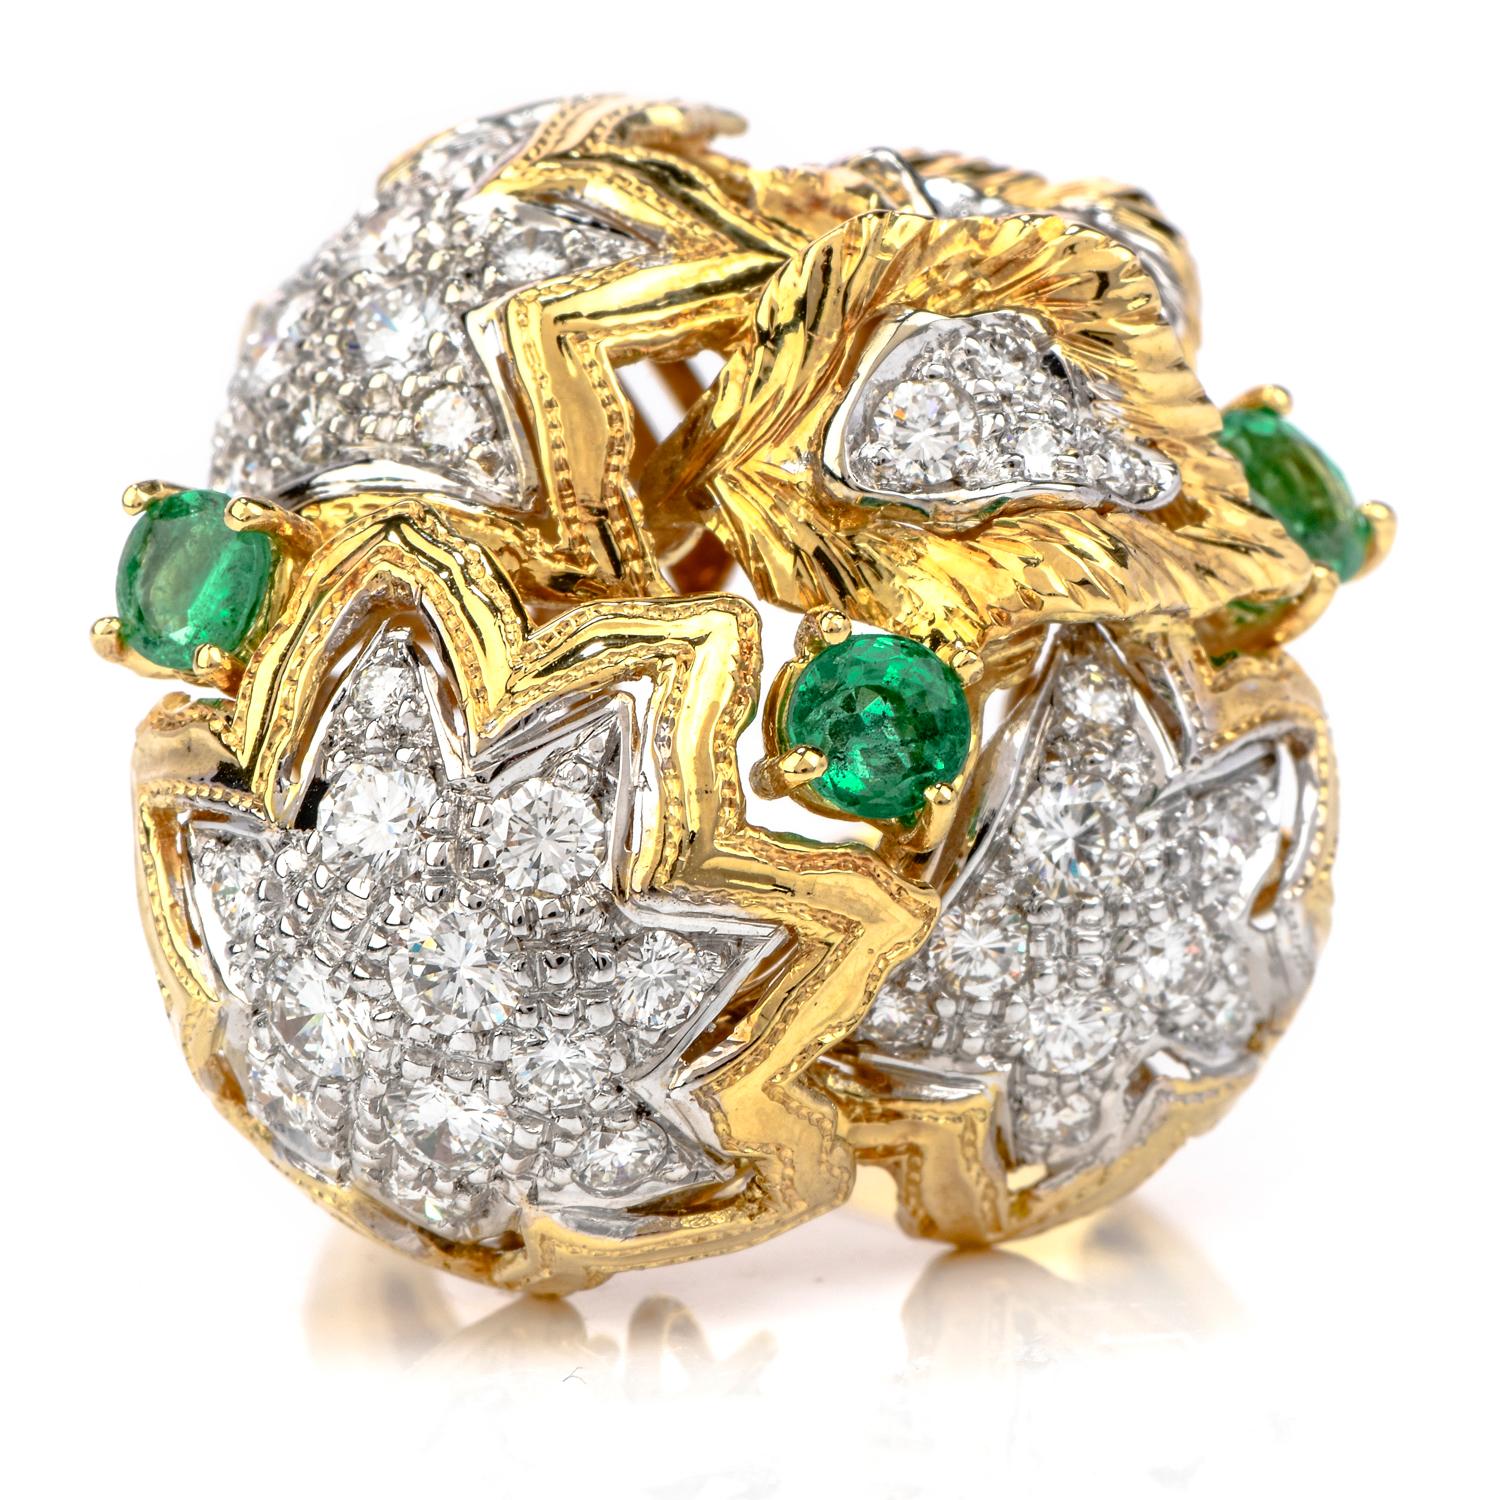 Every person needs a fun and noticeable cocktail ring in their collection.  This 1980's Diamond Emerald 18K Gold Large Star Cocktail Ring would be that perfectly beautiful addition!  
This bursting ring has star motifs and is crafted in 18 karat